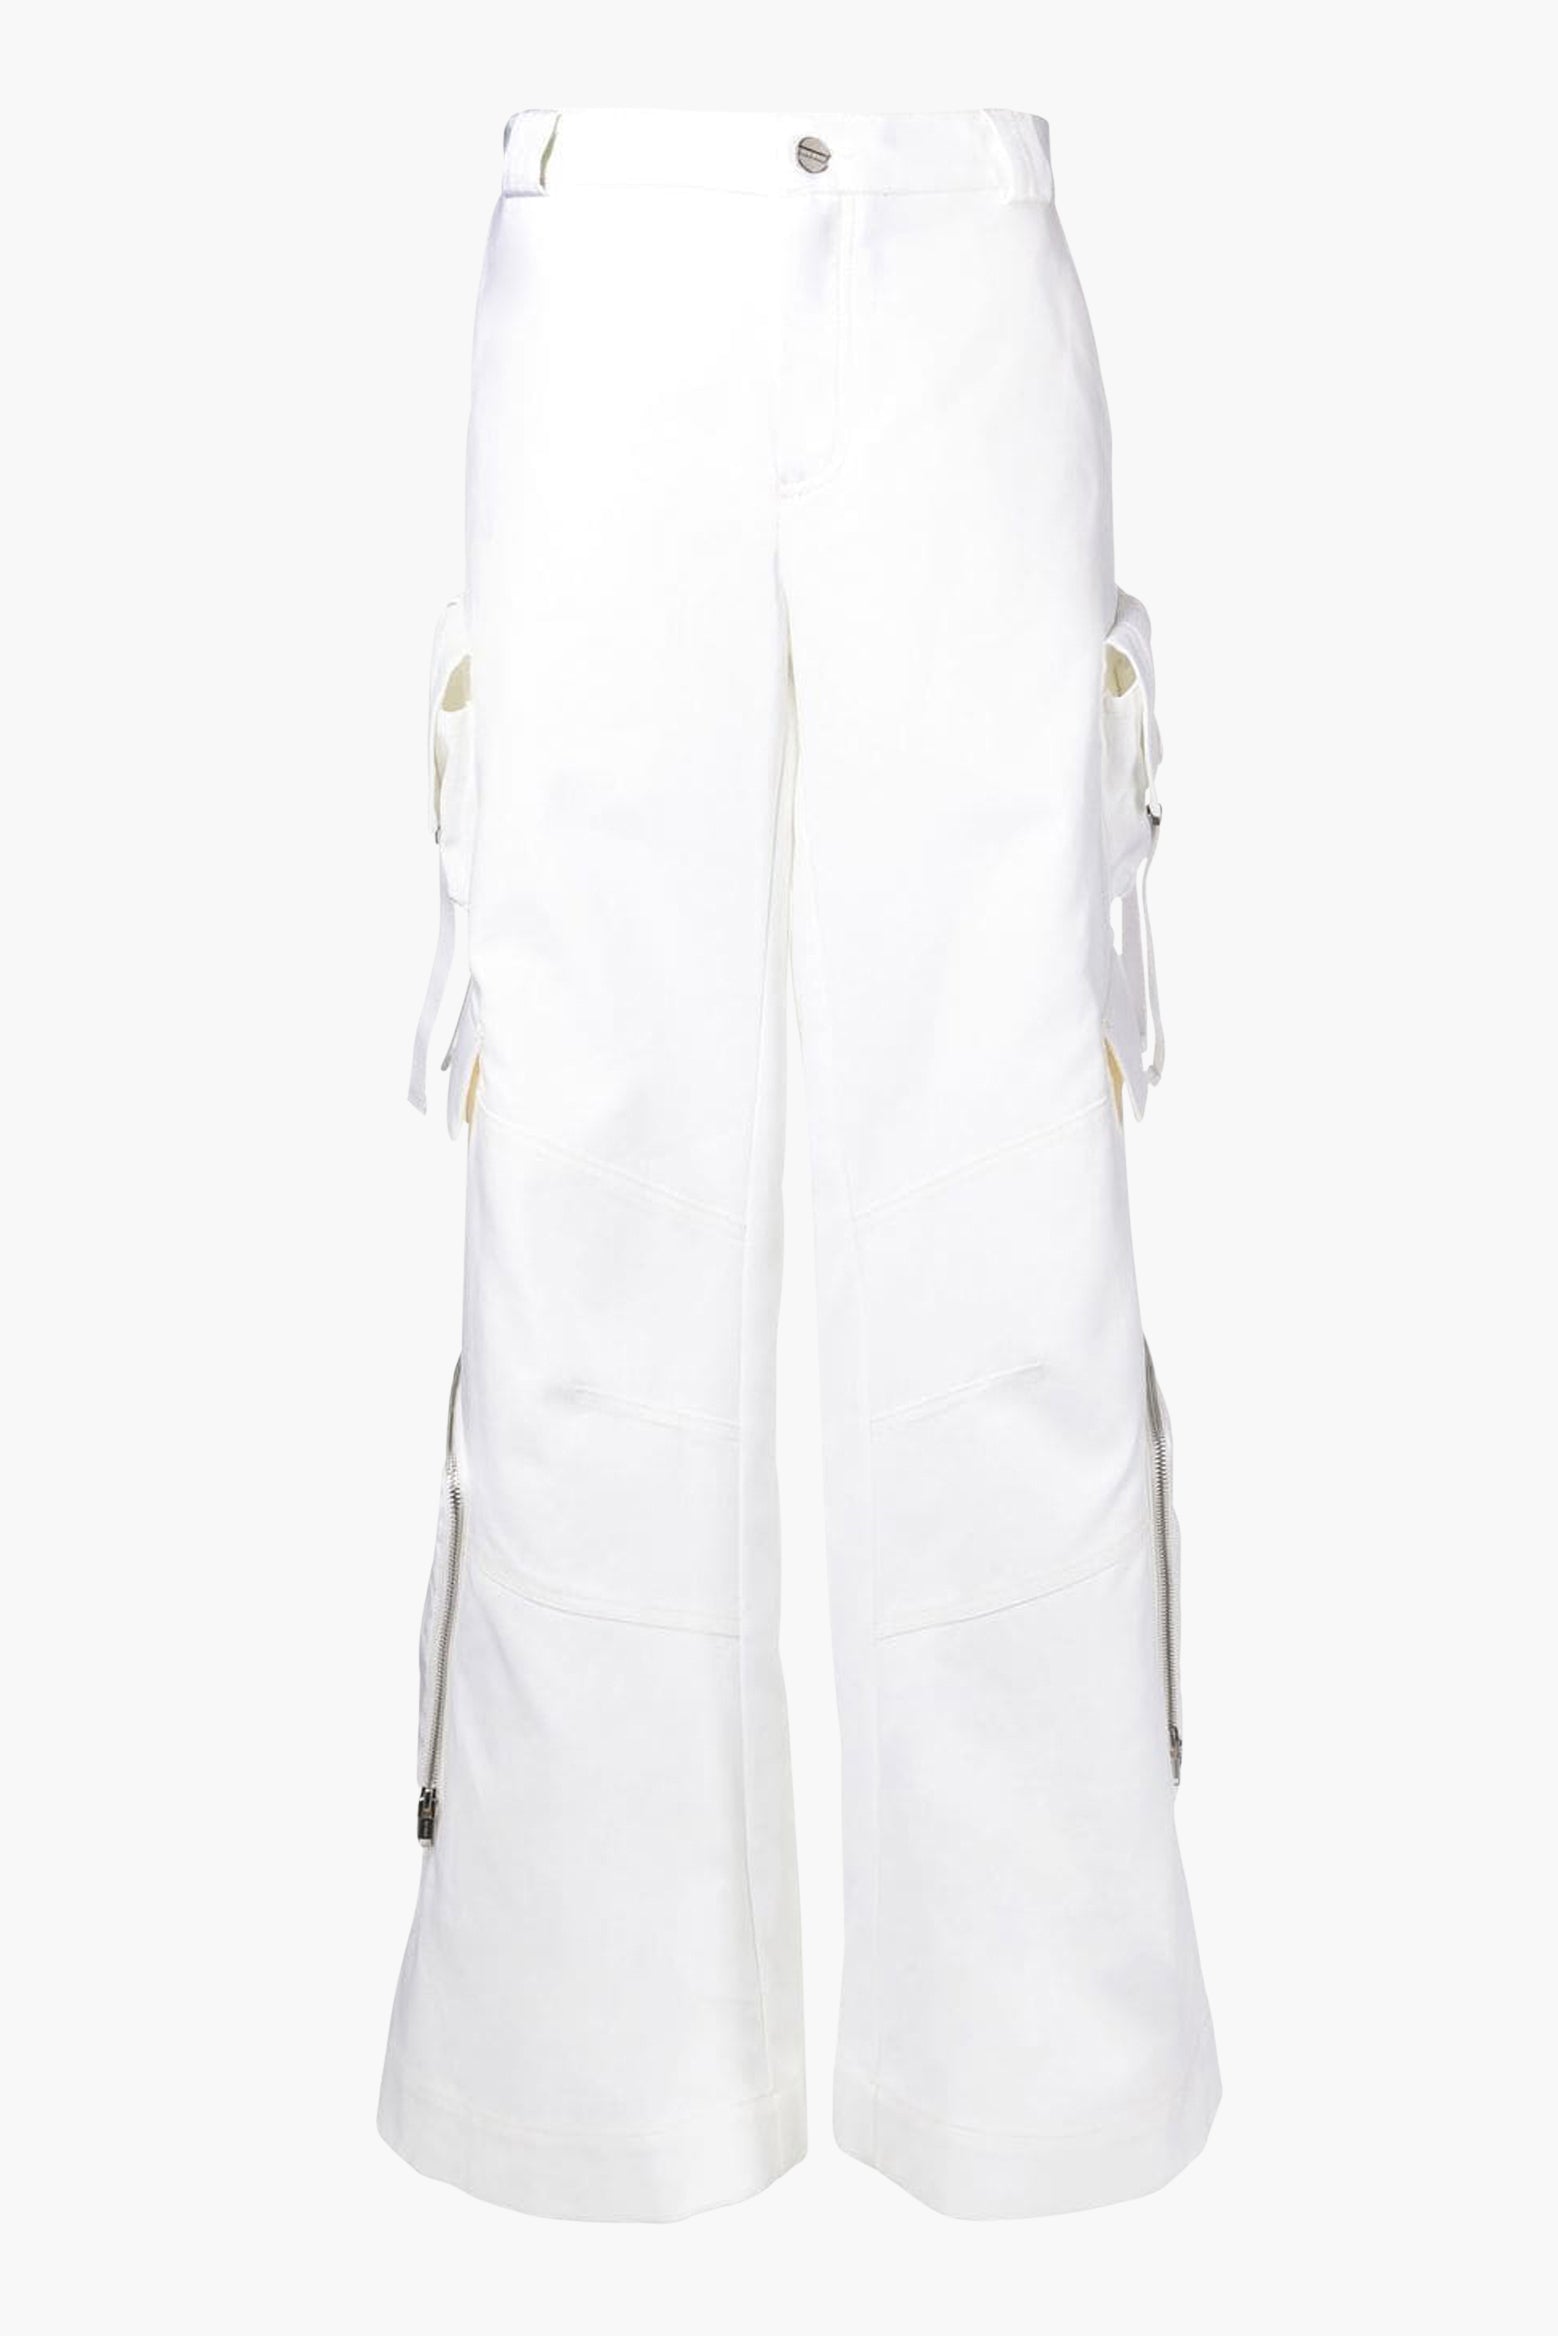 Dion Lee Multi Pocket Cargo Pants in White from The New Trend